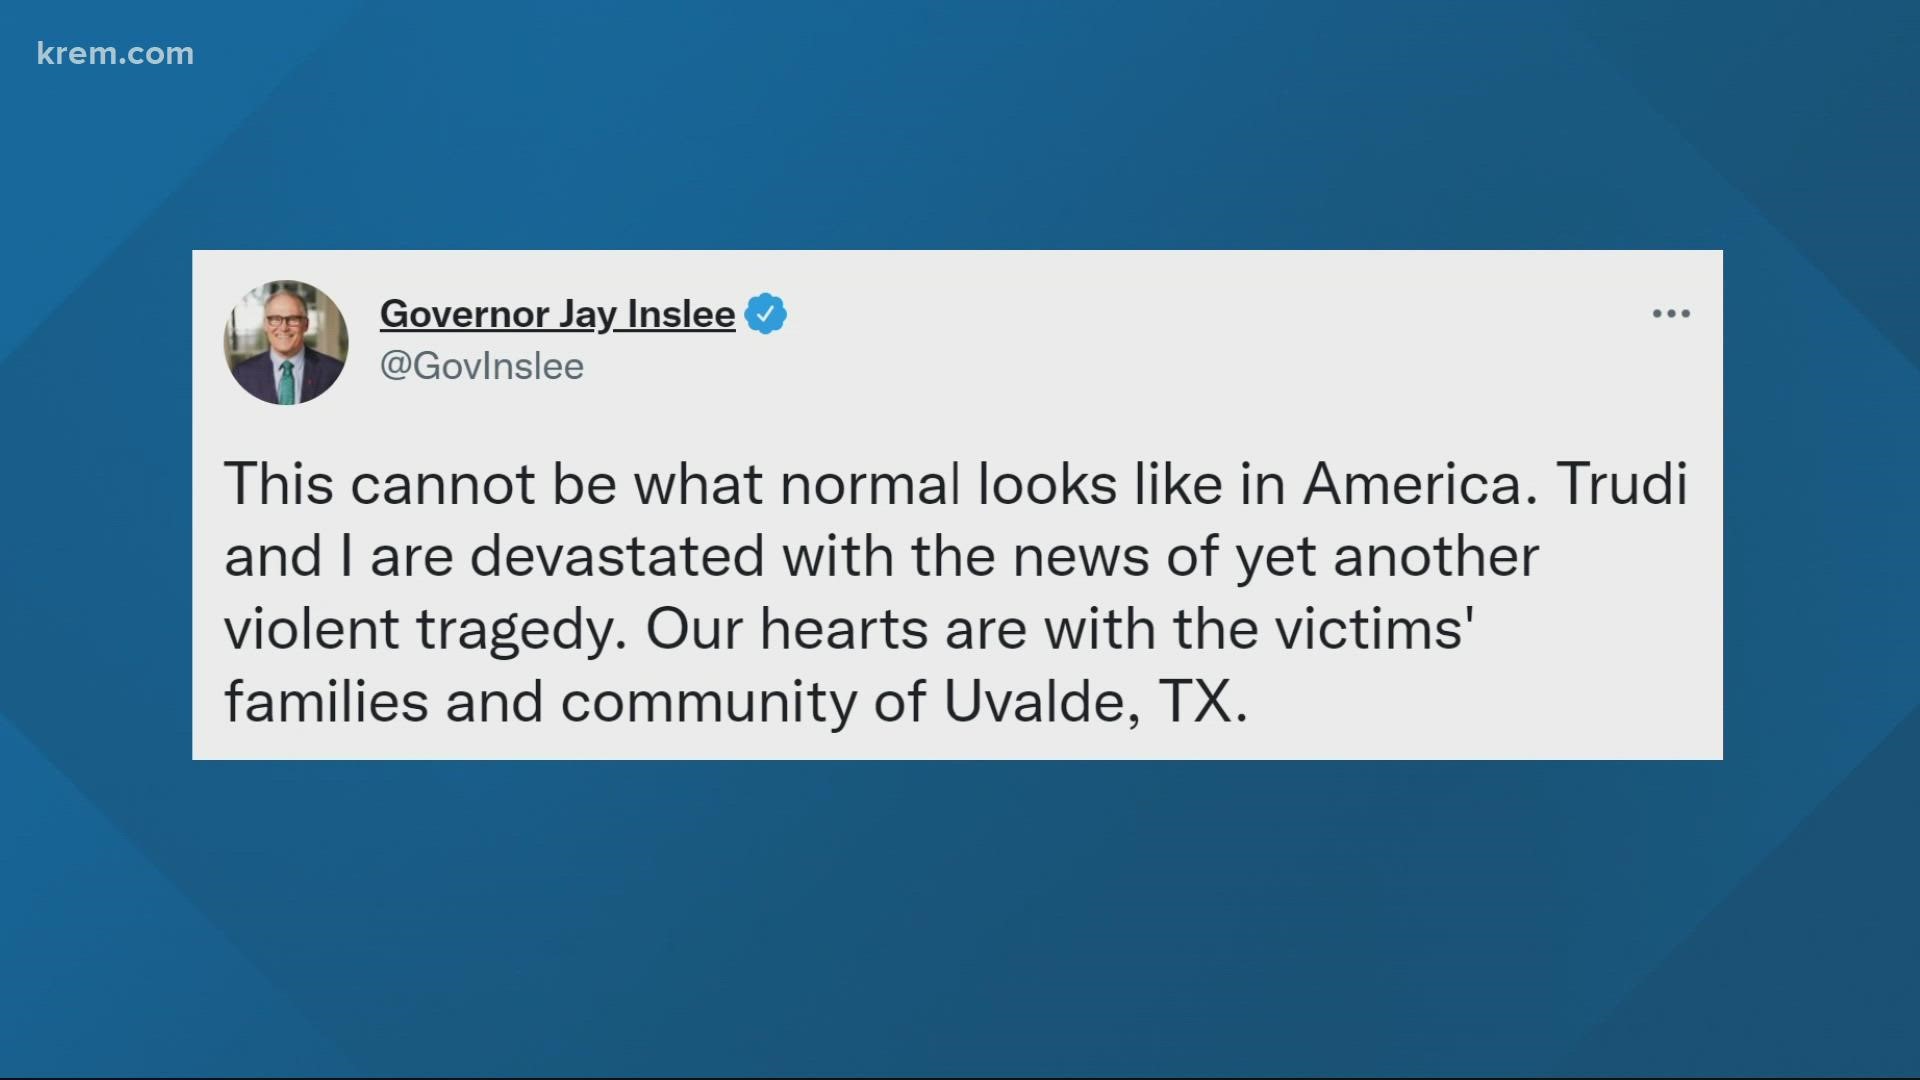 A number of Washington and Idaho politicians, including governors Jay Inslee and Brad Little, shared their reactions to the recent tragedy.